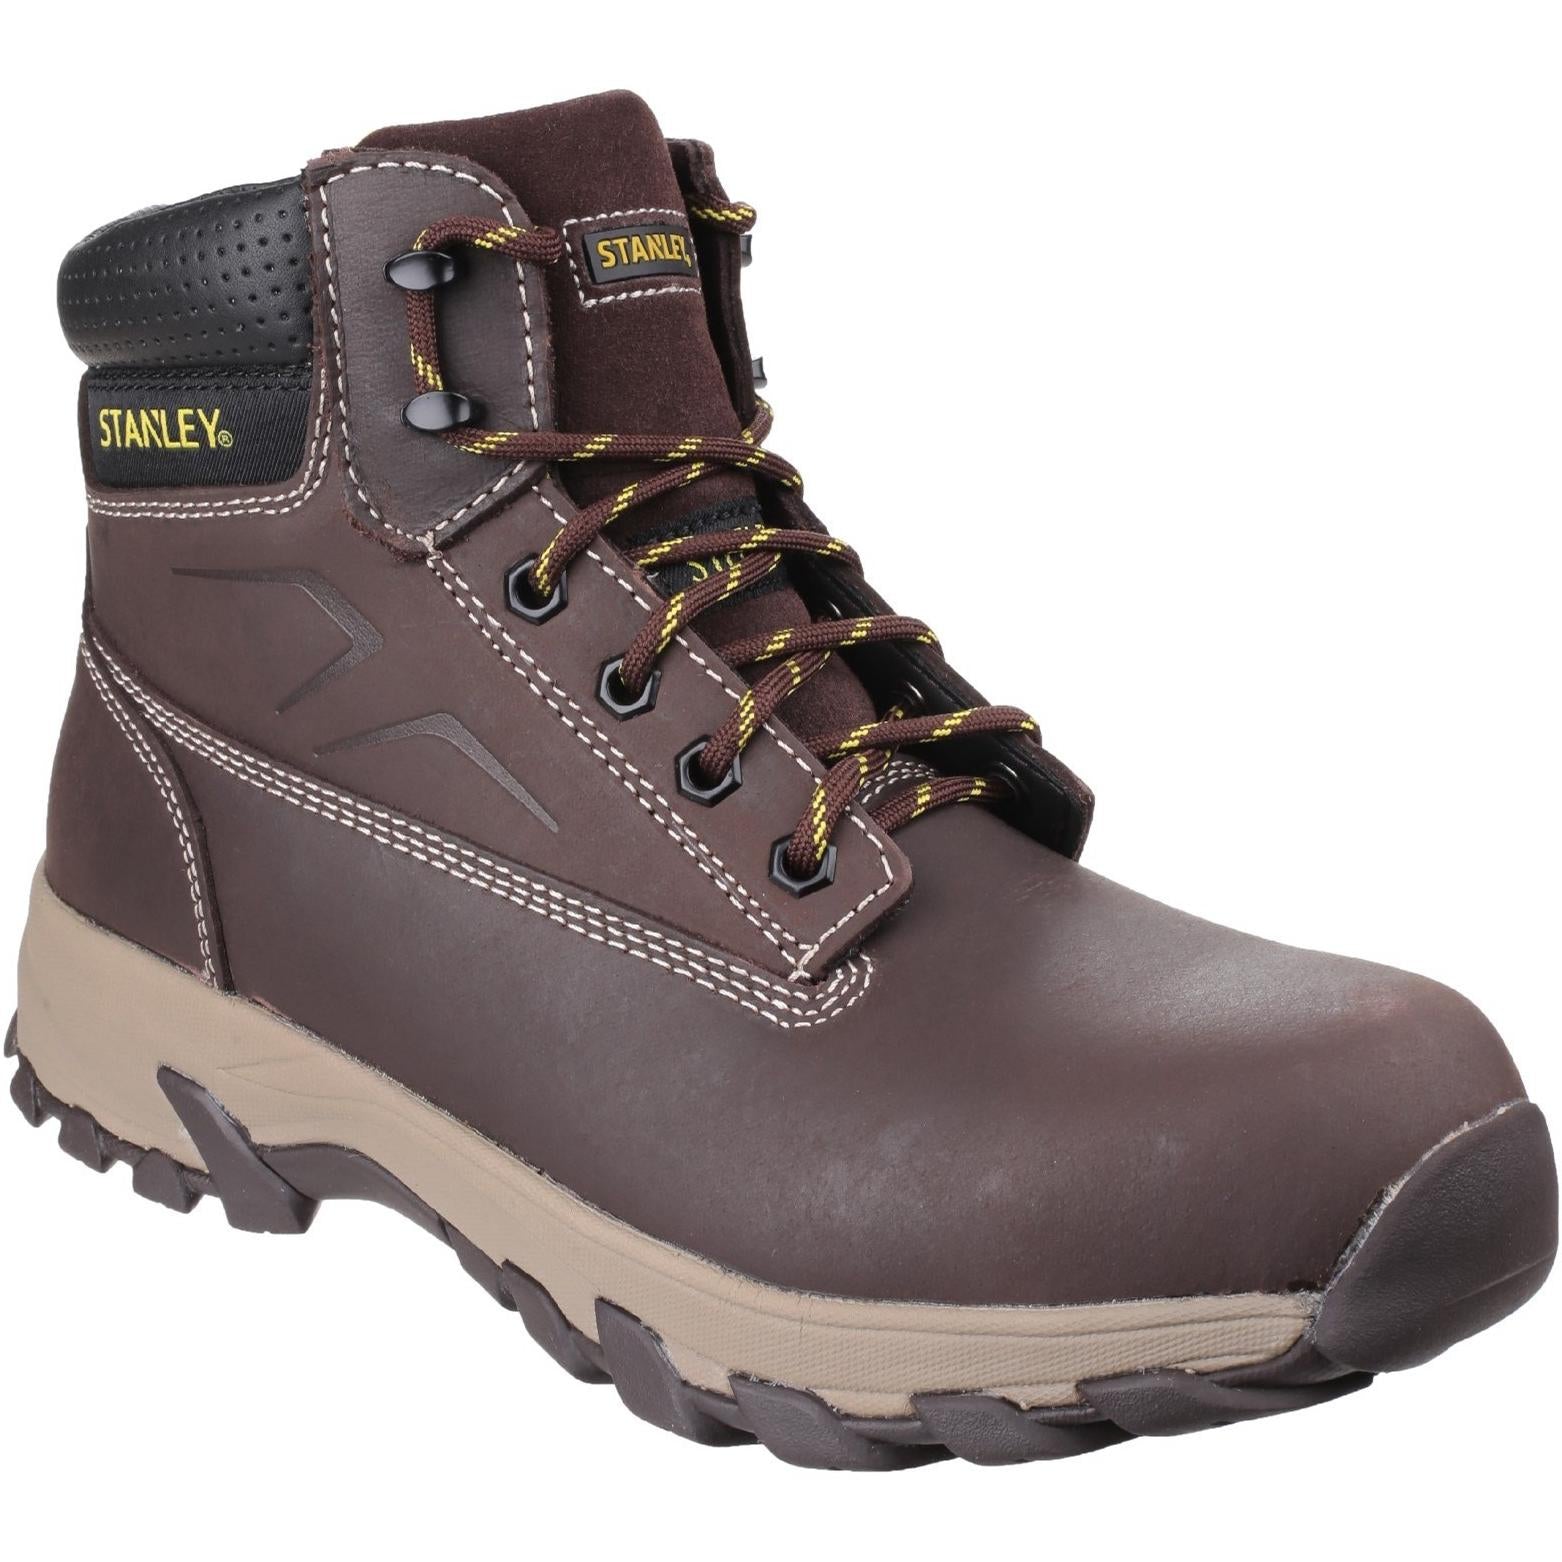 Stanley Tradesman Safety Boot